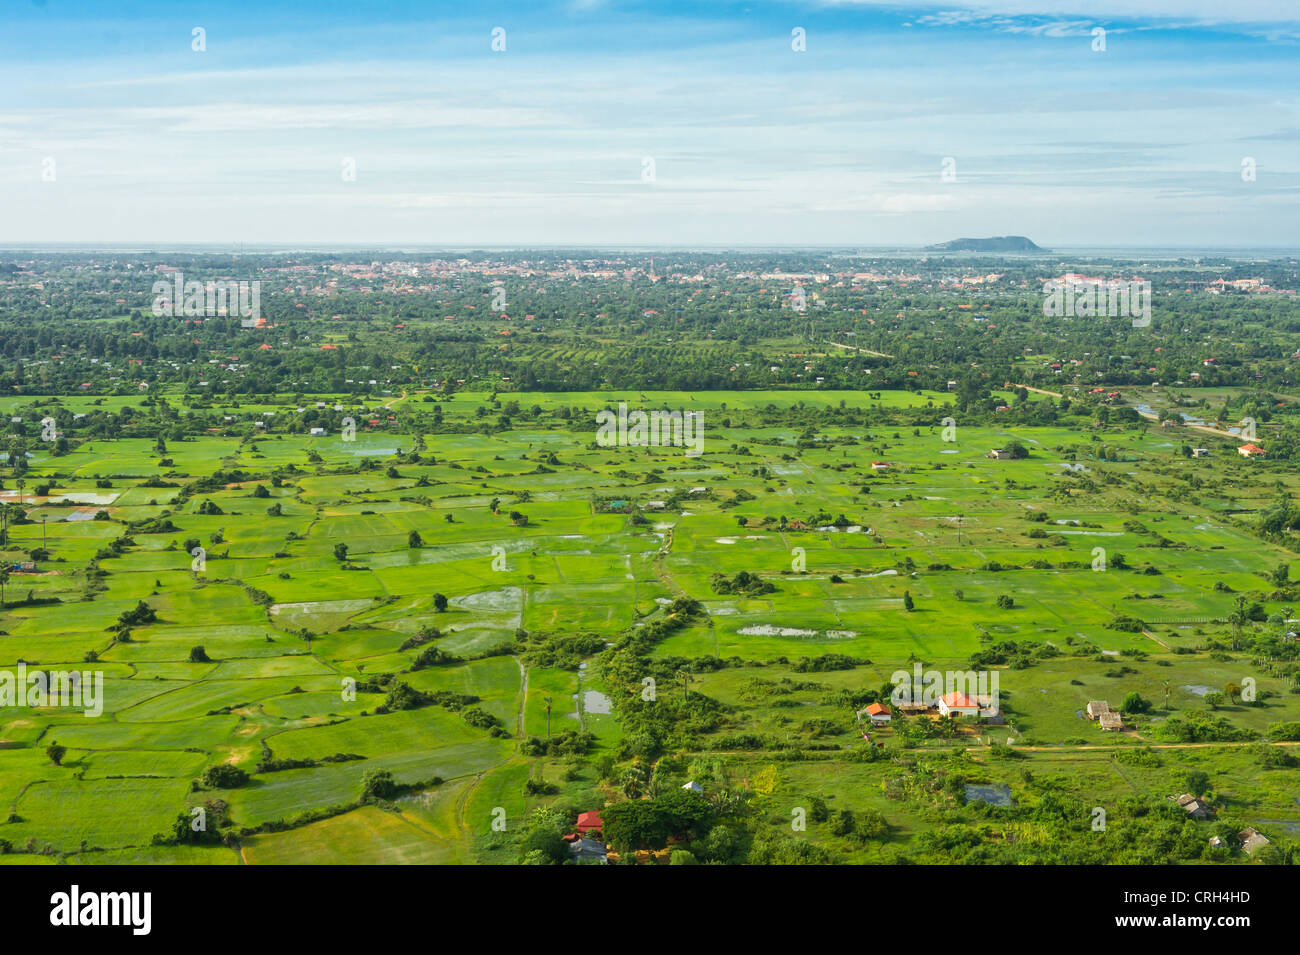 View from balloon of Siem Reap city, Cambodia Stock Photo